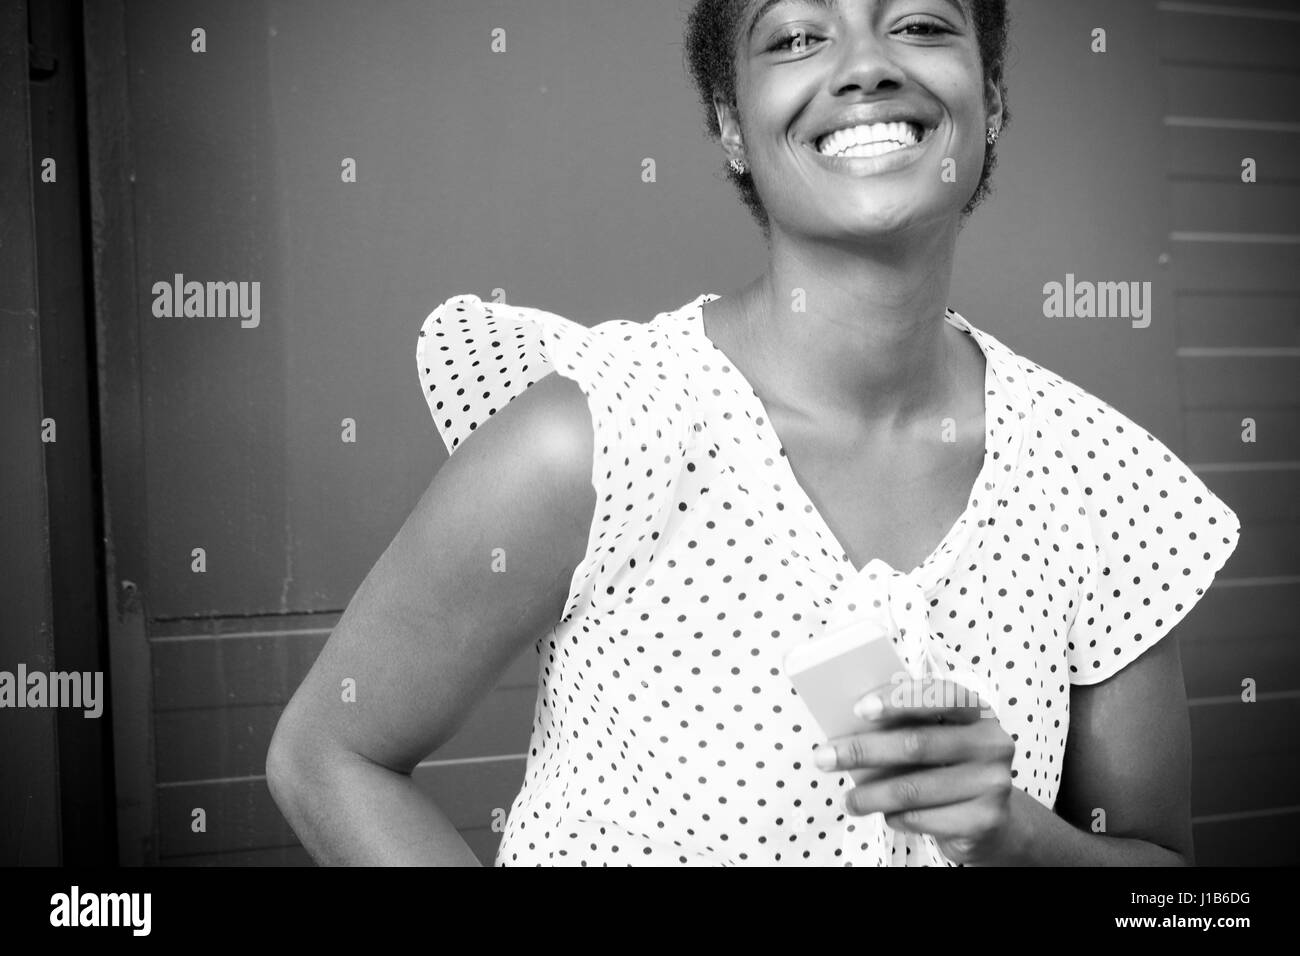 Smiling African American woman holding cell phone Stock Photo